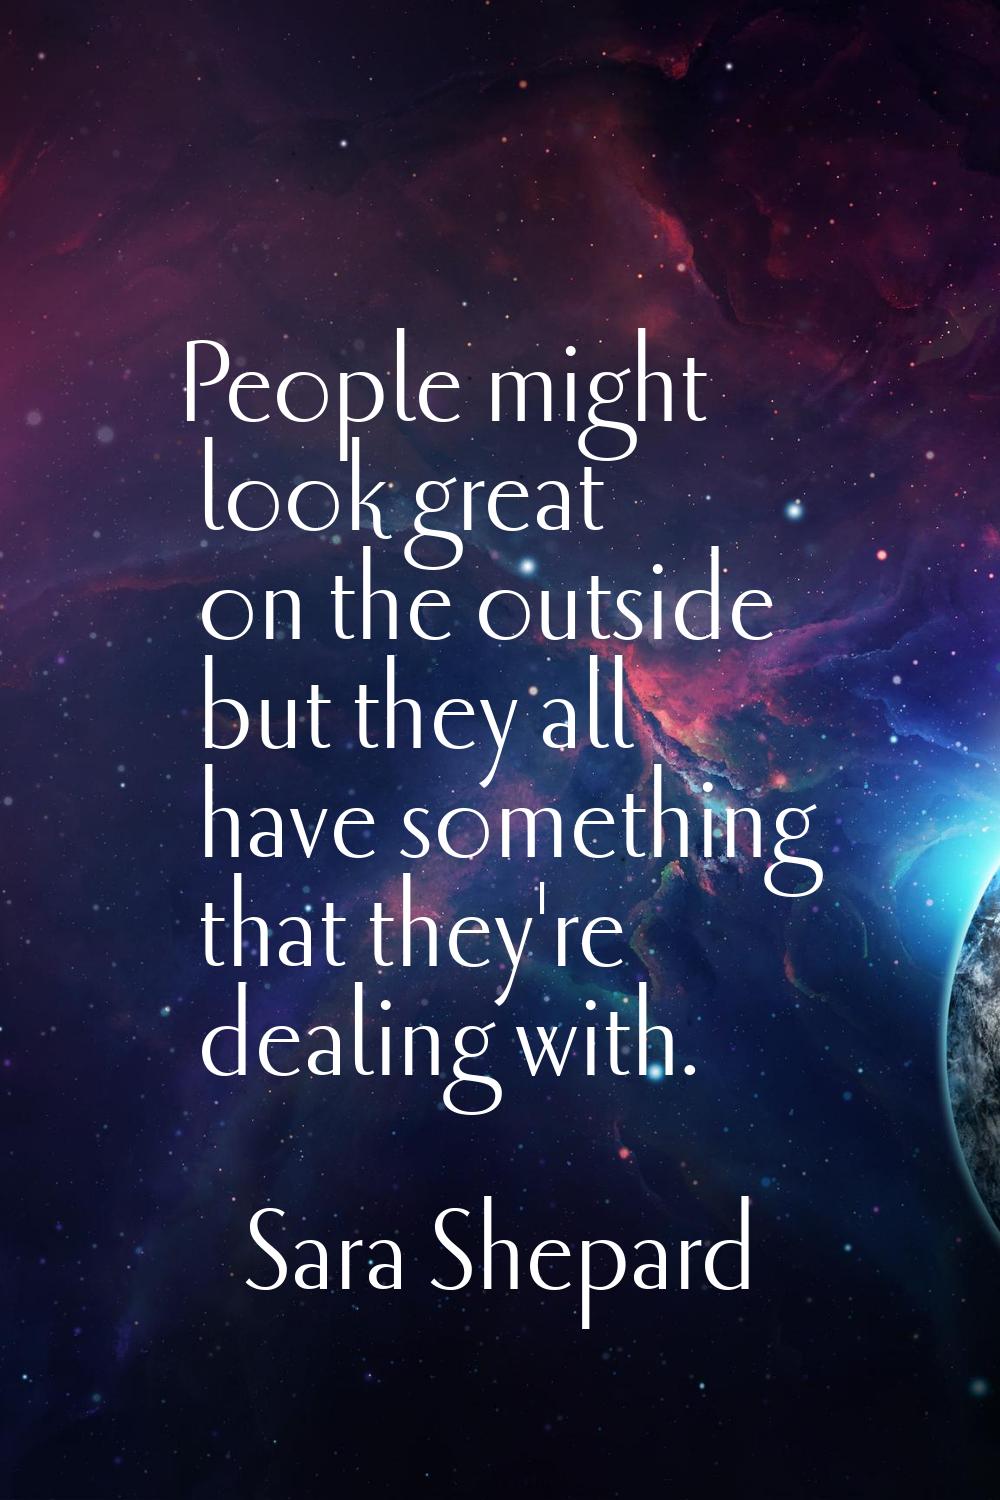 People might look great on the outside but they all have something that they're dealing with.